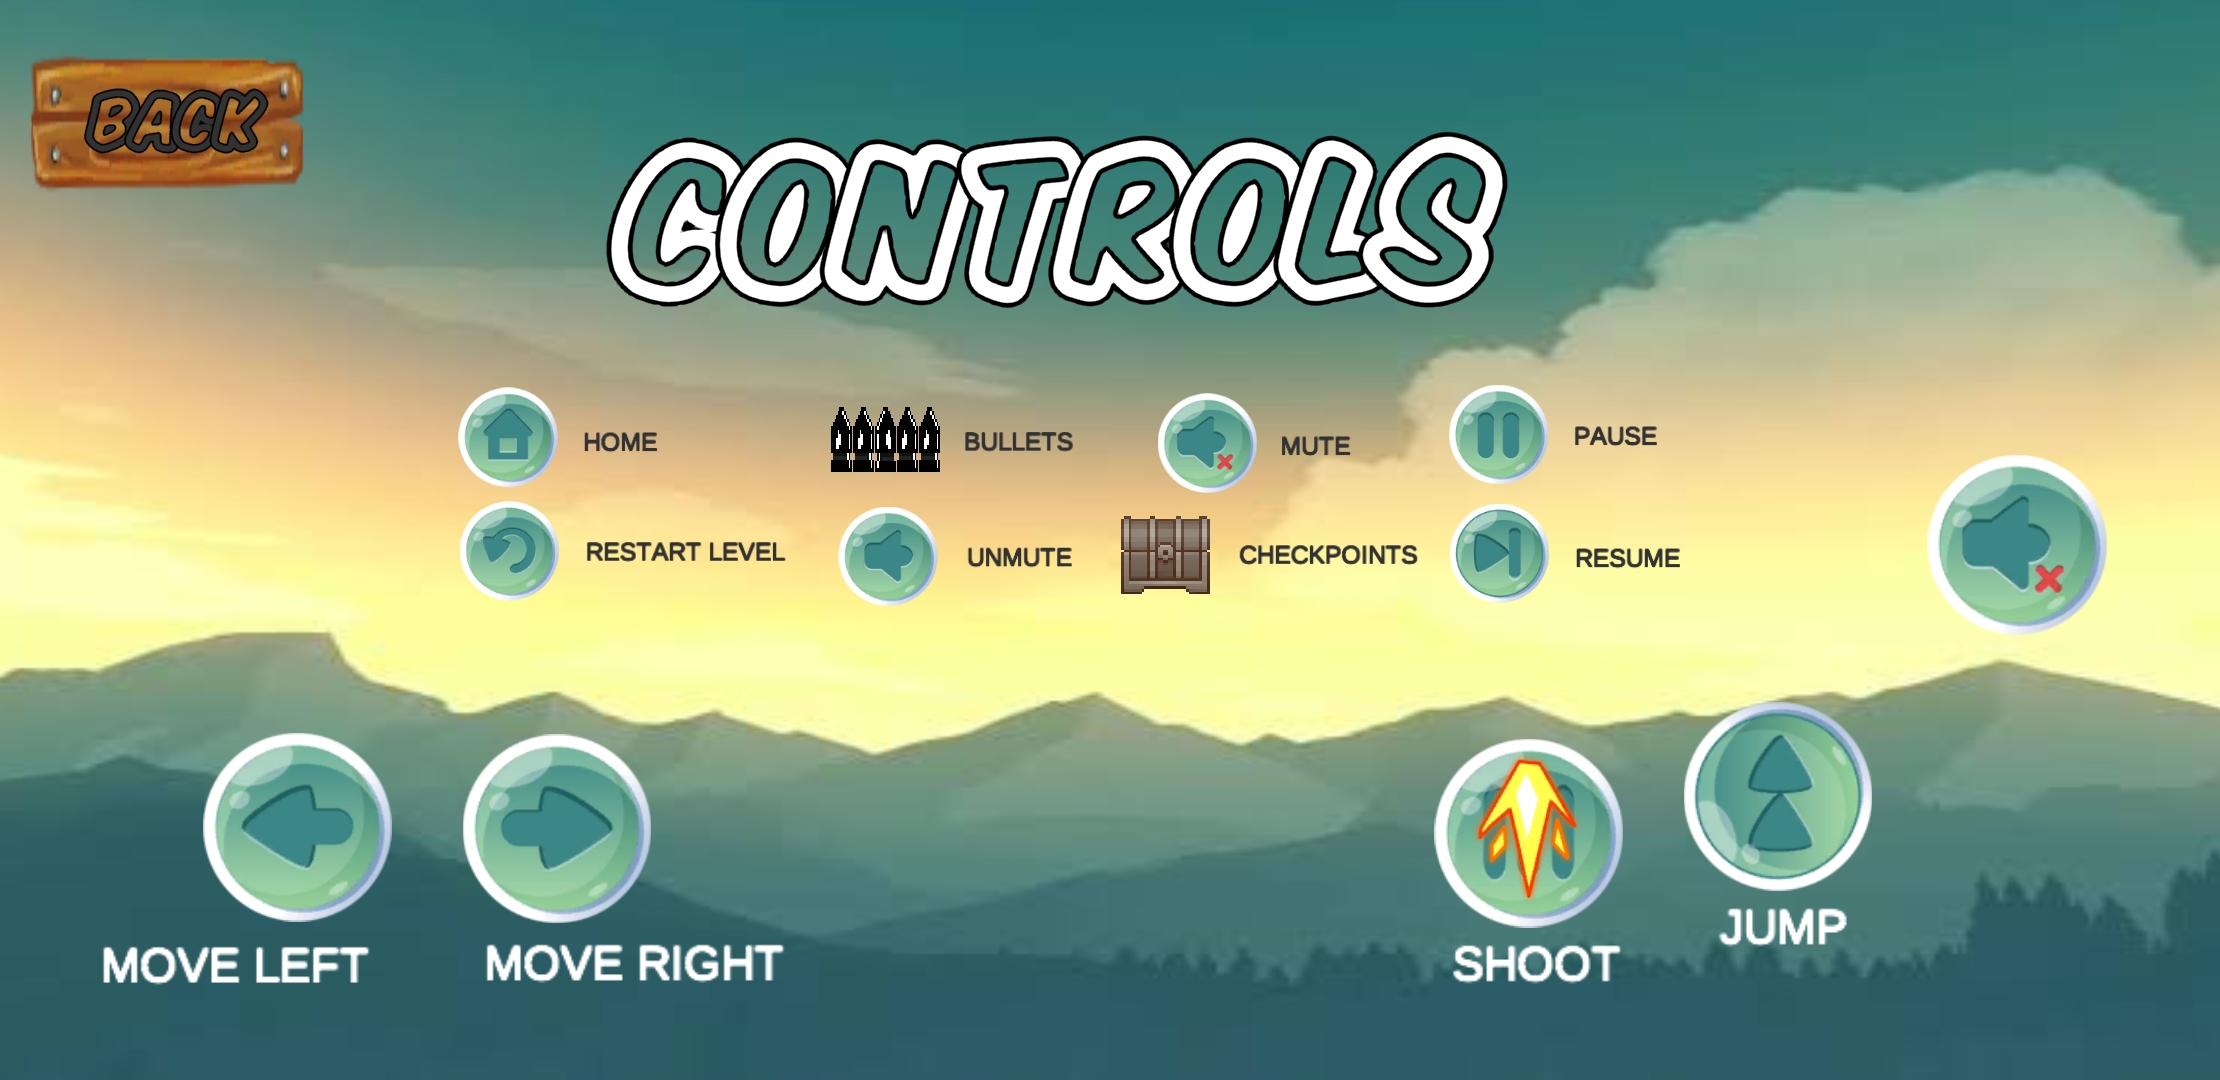 A Control system for the game